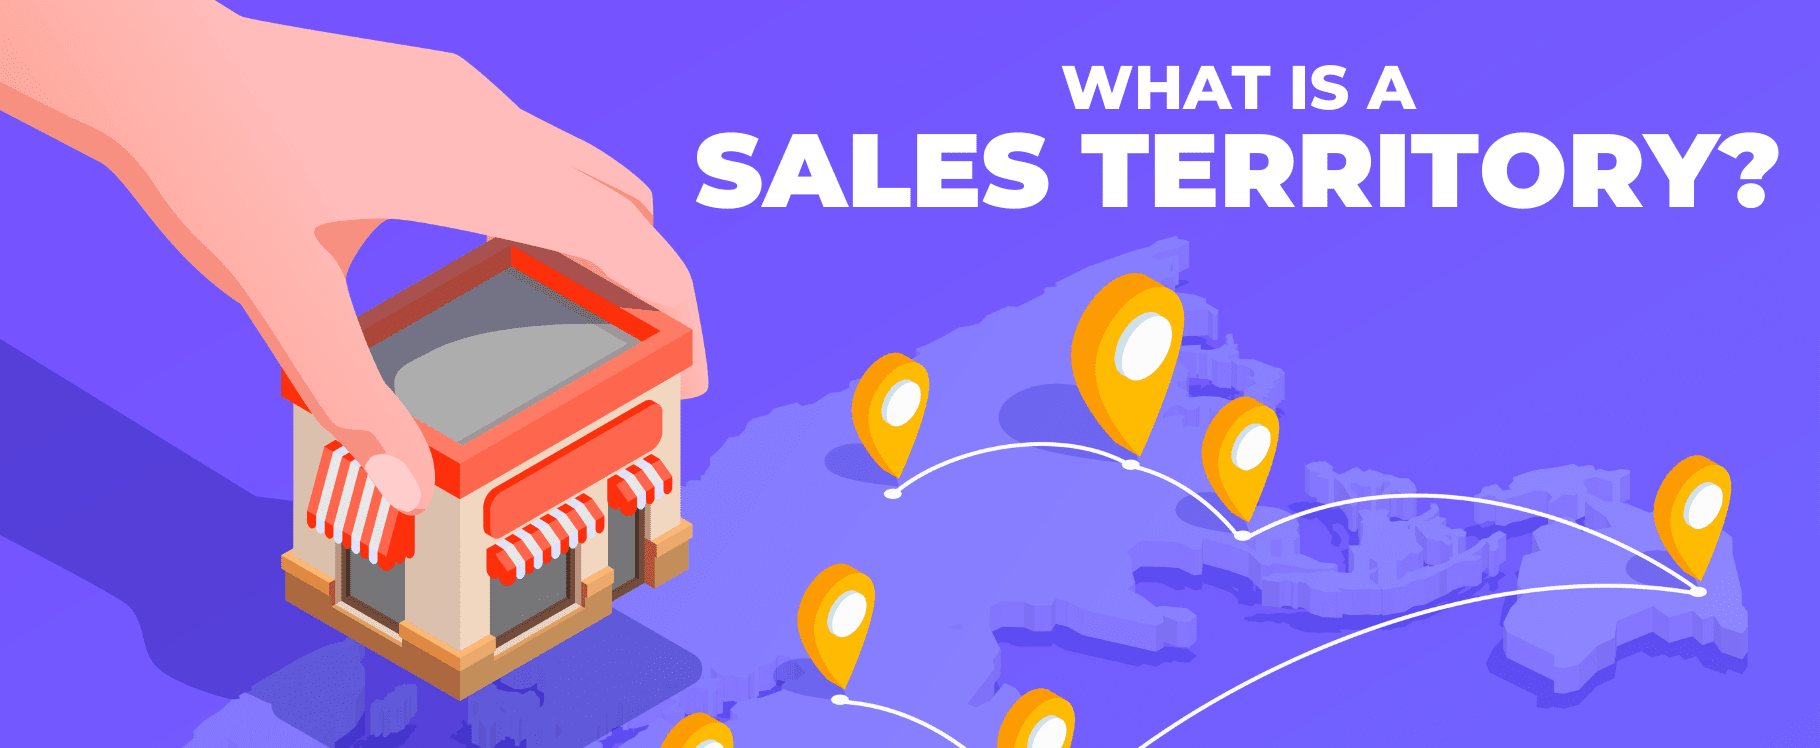 what is a sales territory